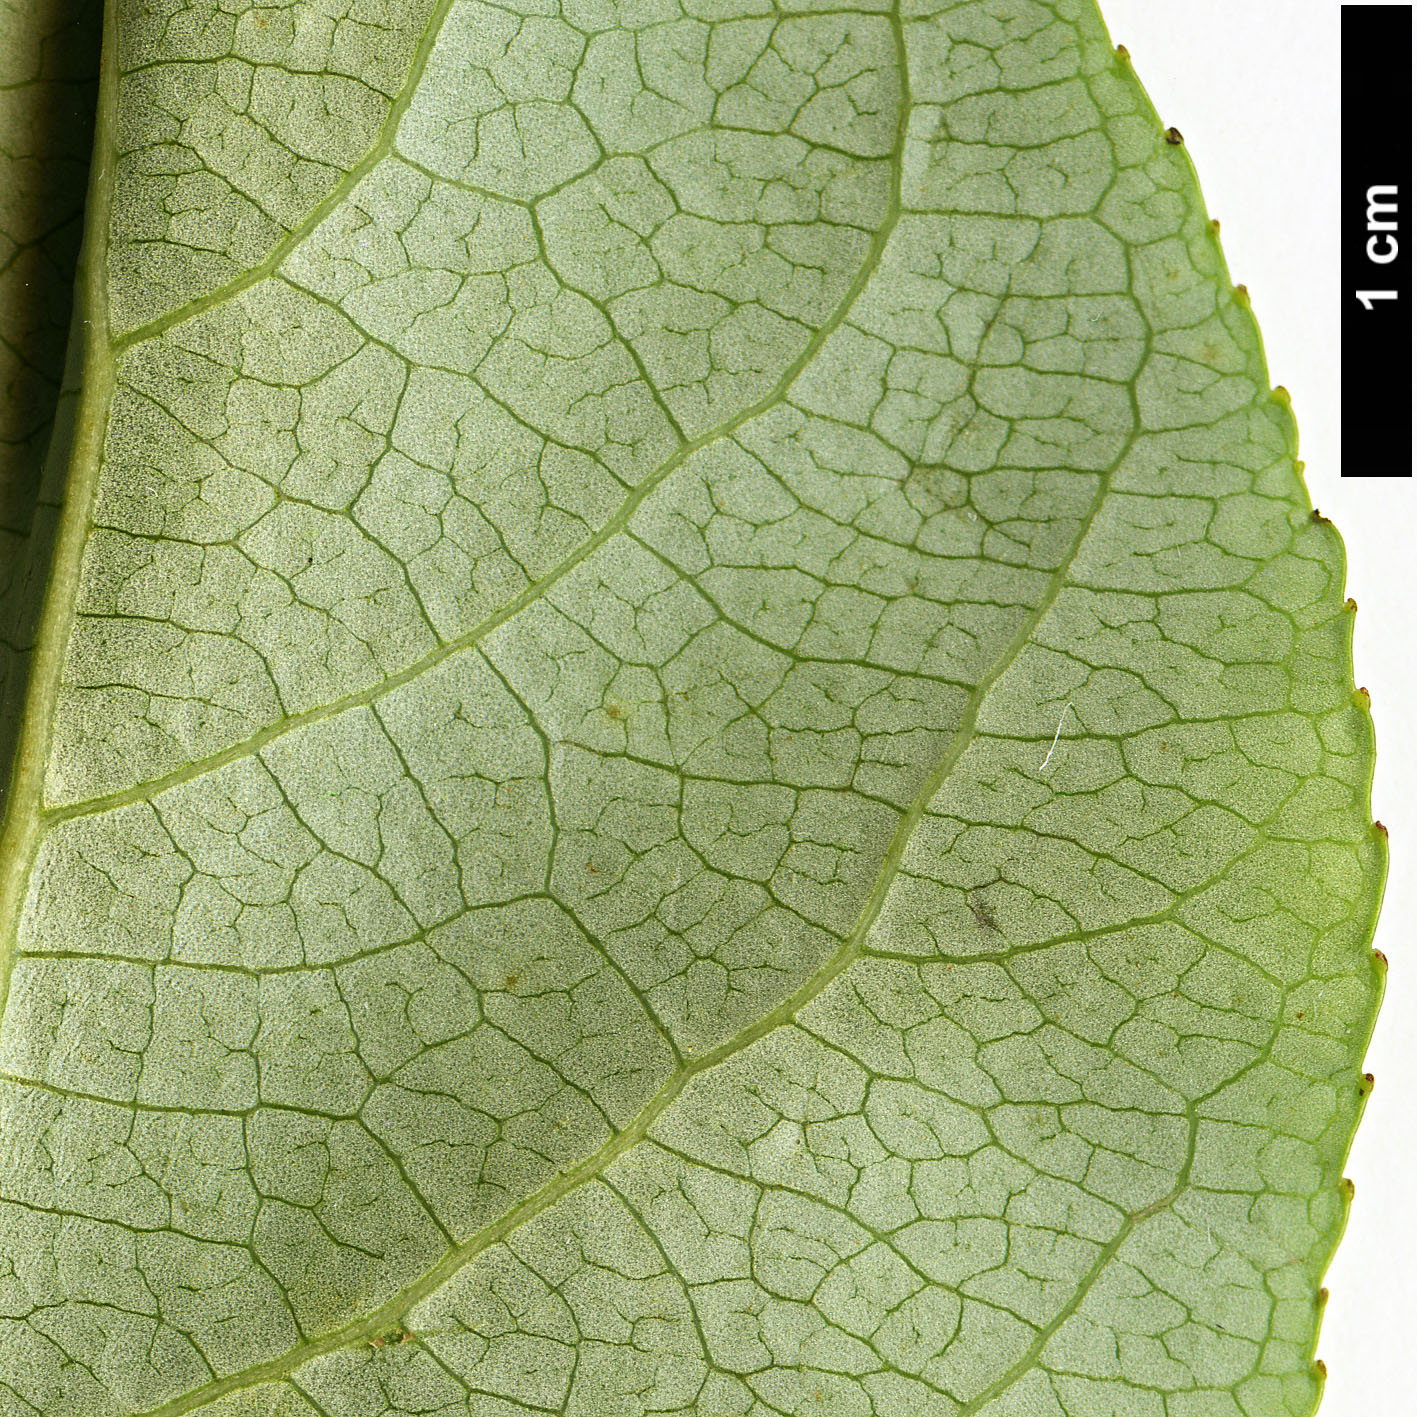 High resolution image: Family: Salicaceae - Genus: Populus - Taxon: cathayana